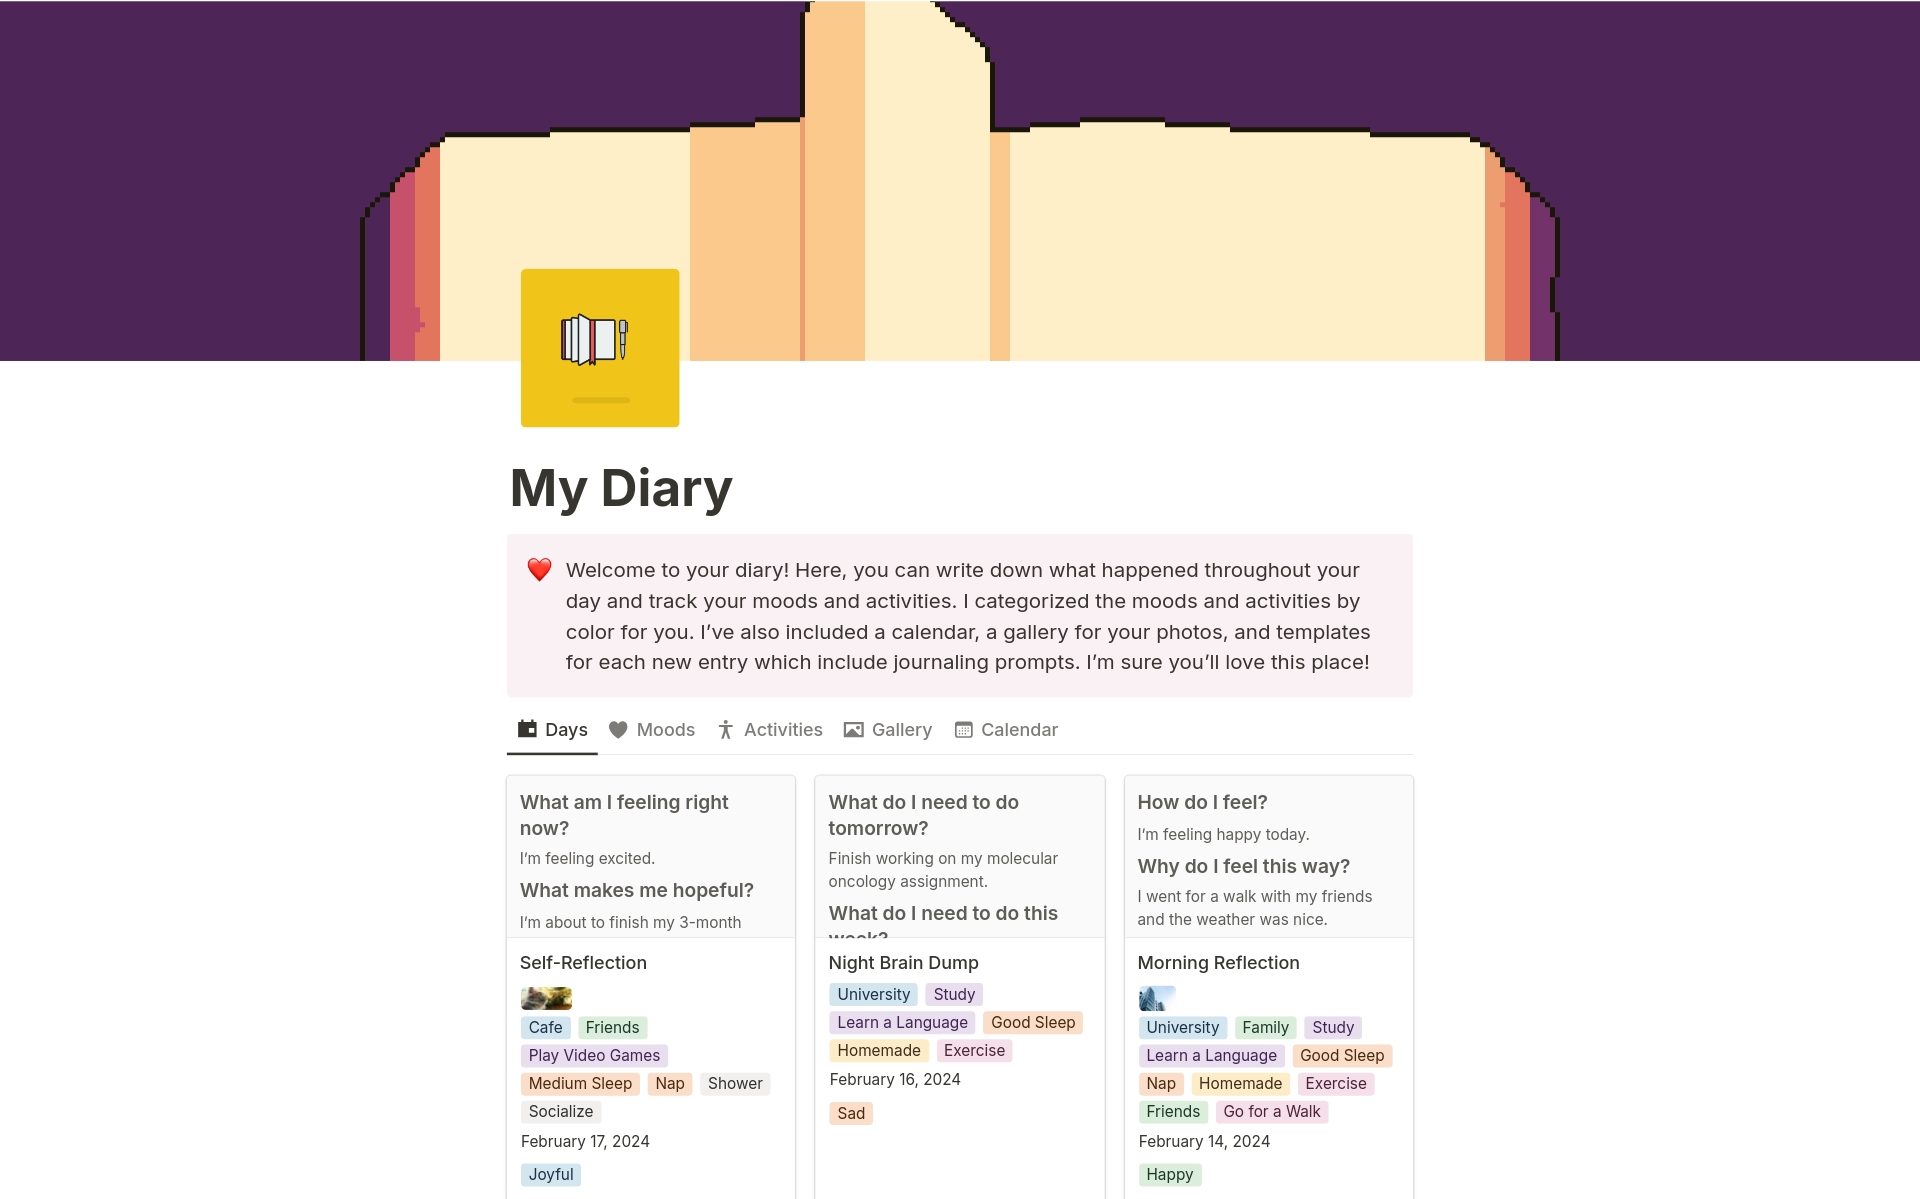 A diary where you can track your moods, activities and journal using pre-made prompts.